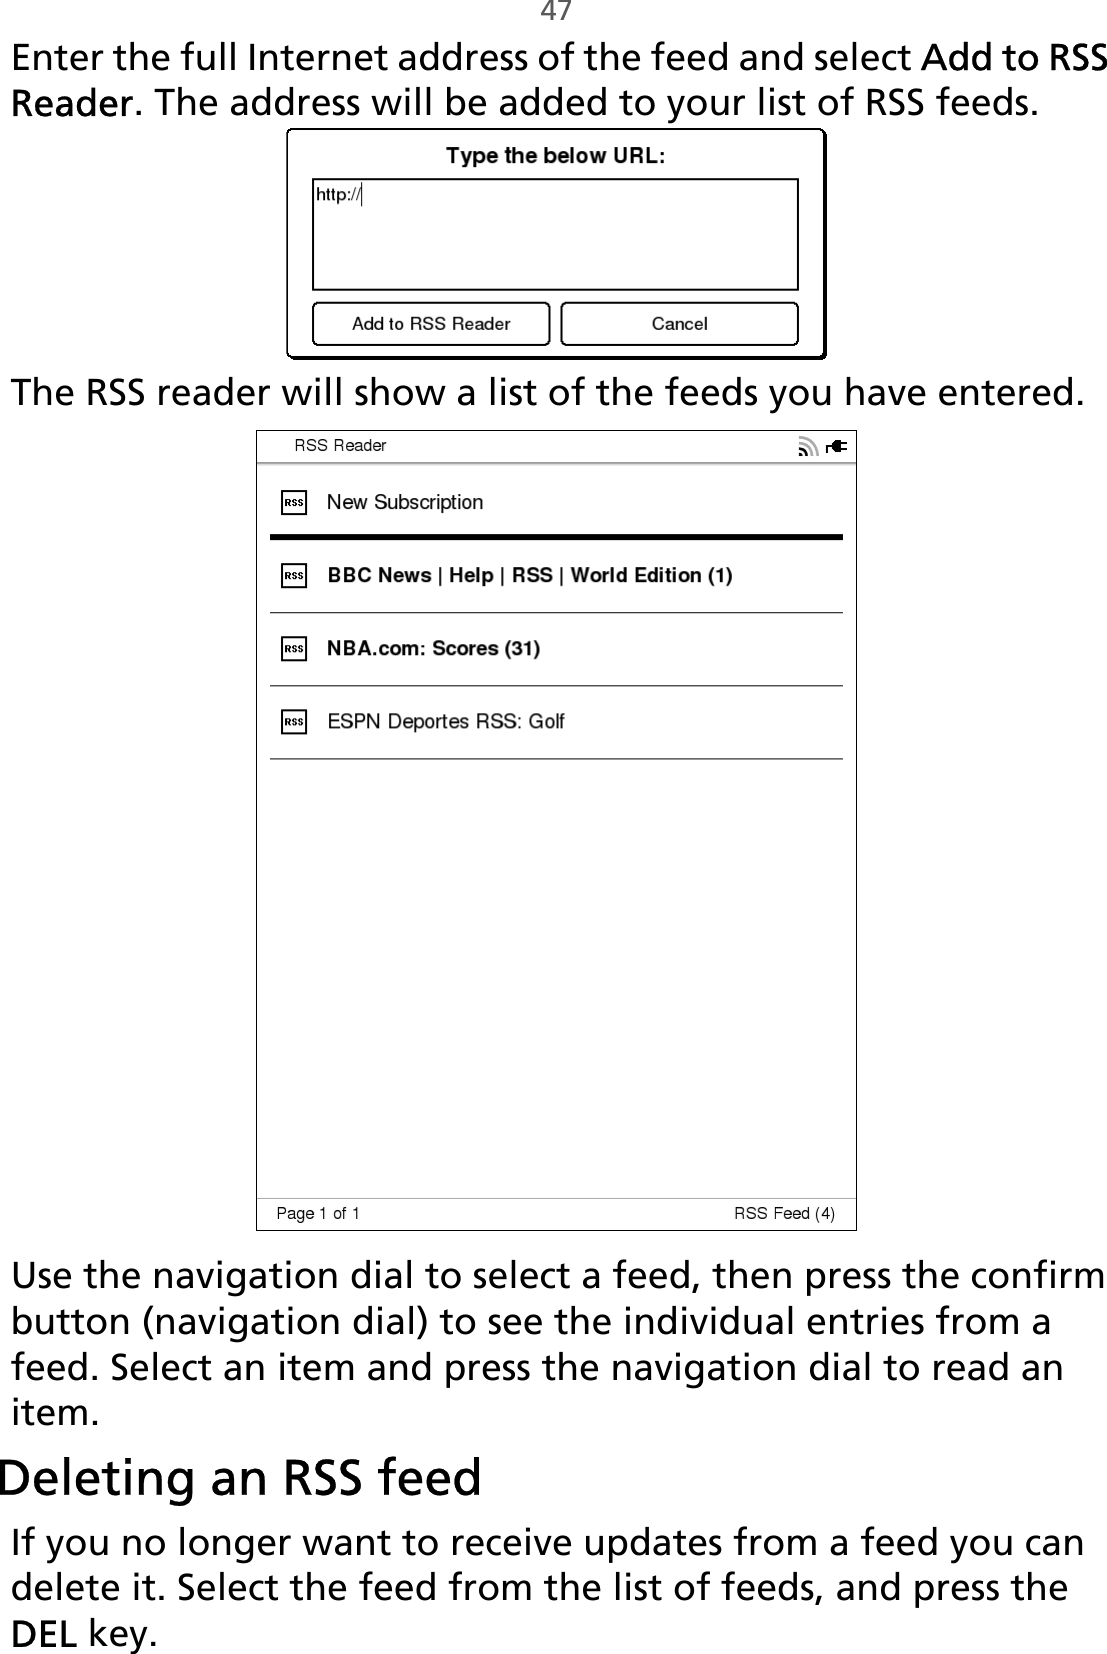 47Enter the full Internet address of the feed and select Add to RSS Reader. The address will be added to your list of RSS feeds.The RSS reader will show a list of the feeds you have entered.Use the navigation dial to select a feed, then press the confirm button (navigation dial) to see the individual entries from a feed. Select an item and press the navigation dial to read an item.Deleting an RSS feedIf you no longer want to receive updates from a feed you can delete it. Select the feed from the list of feeds, and press the DEL key.